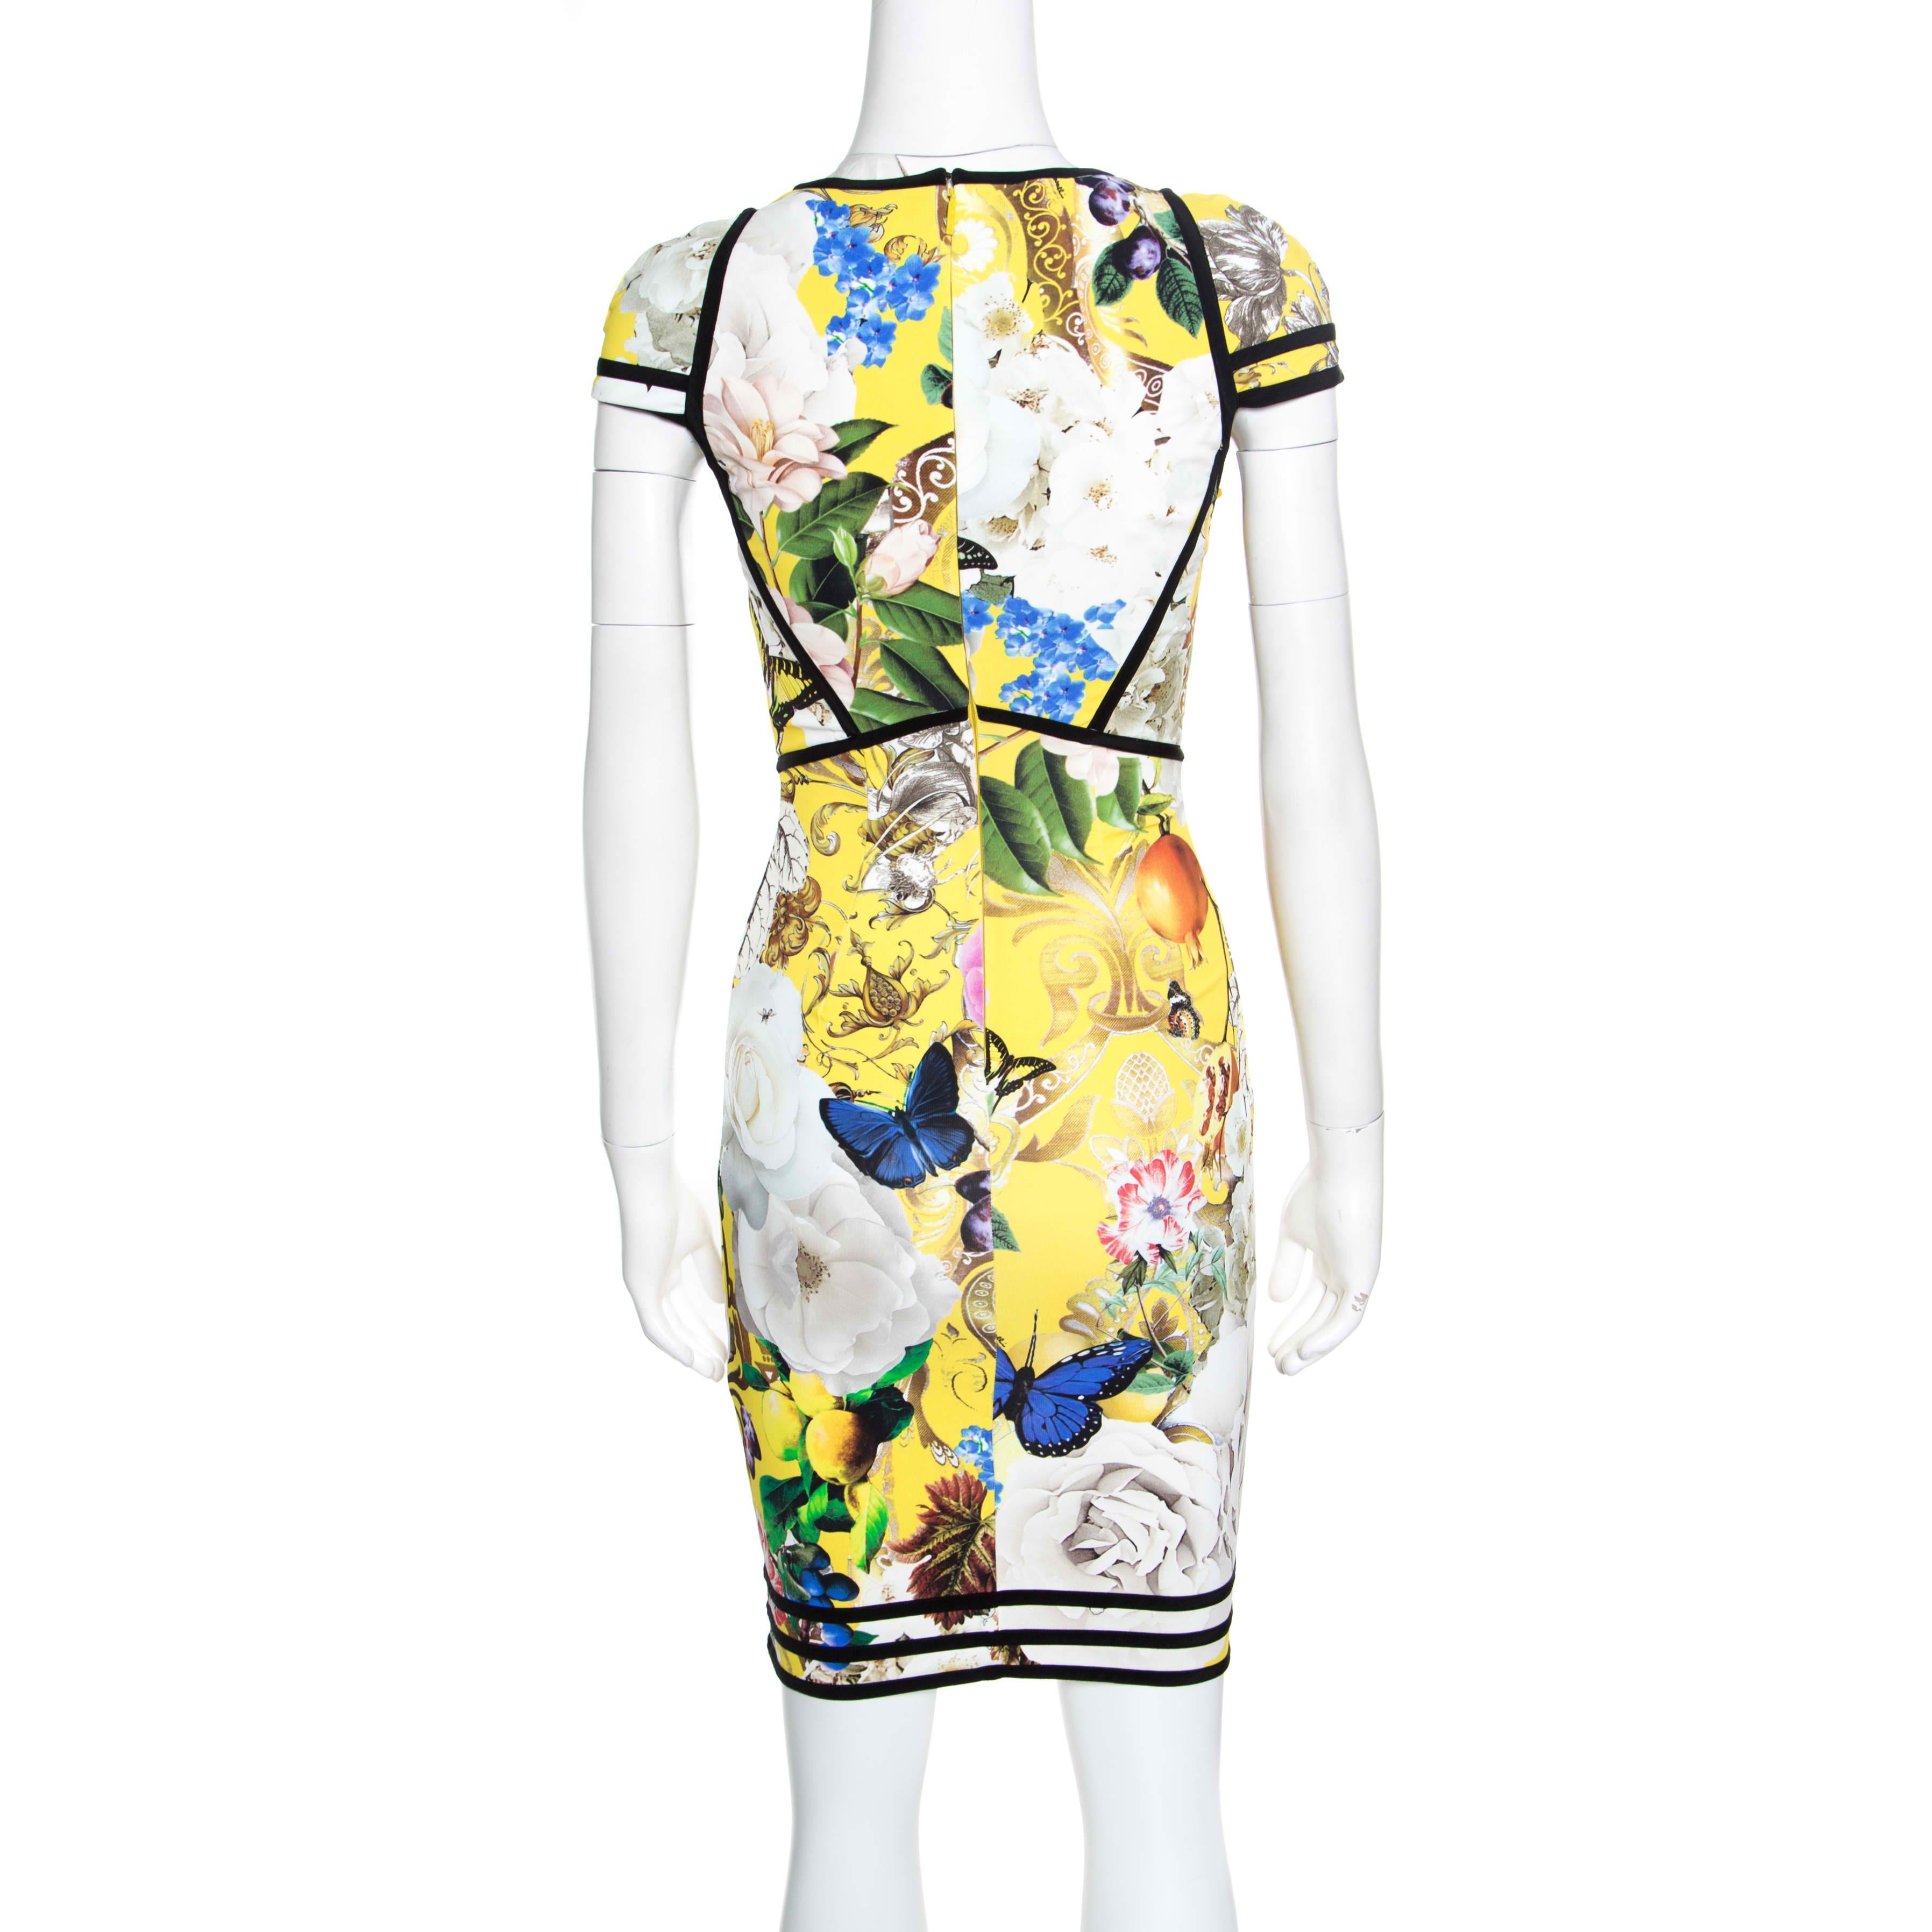 When it comes to dressing up in Roberto Cavalli, you are sure to make an impression! This yellow Punto dress is made of a viscose blend and features a vibrant fruit and gloral printed pattern all over it. It flaunts a flattering silhouette with a